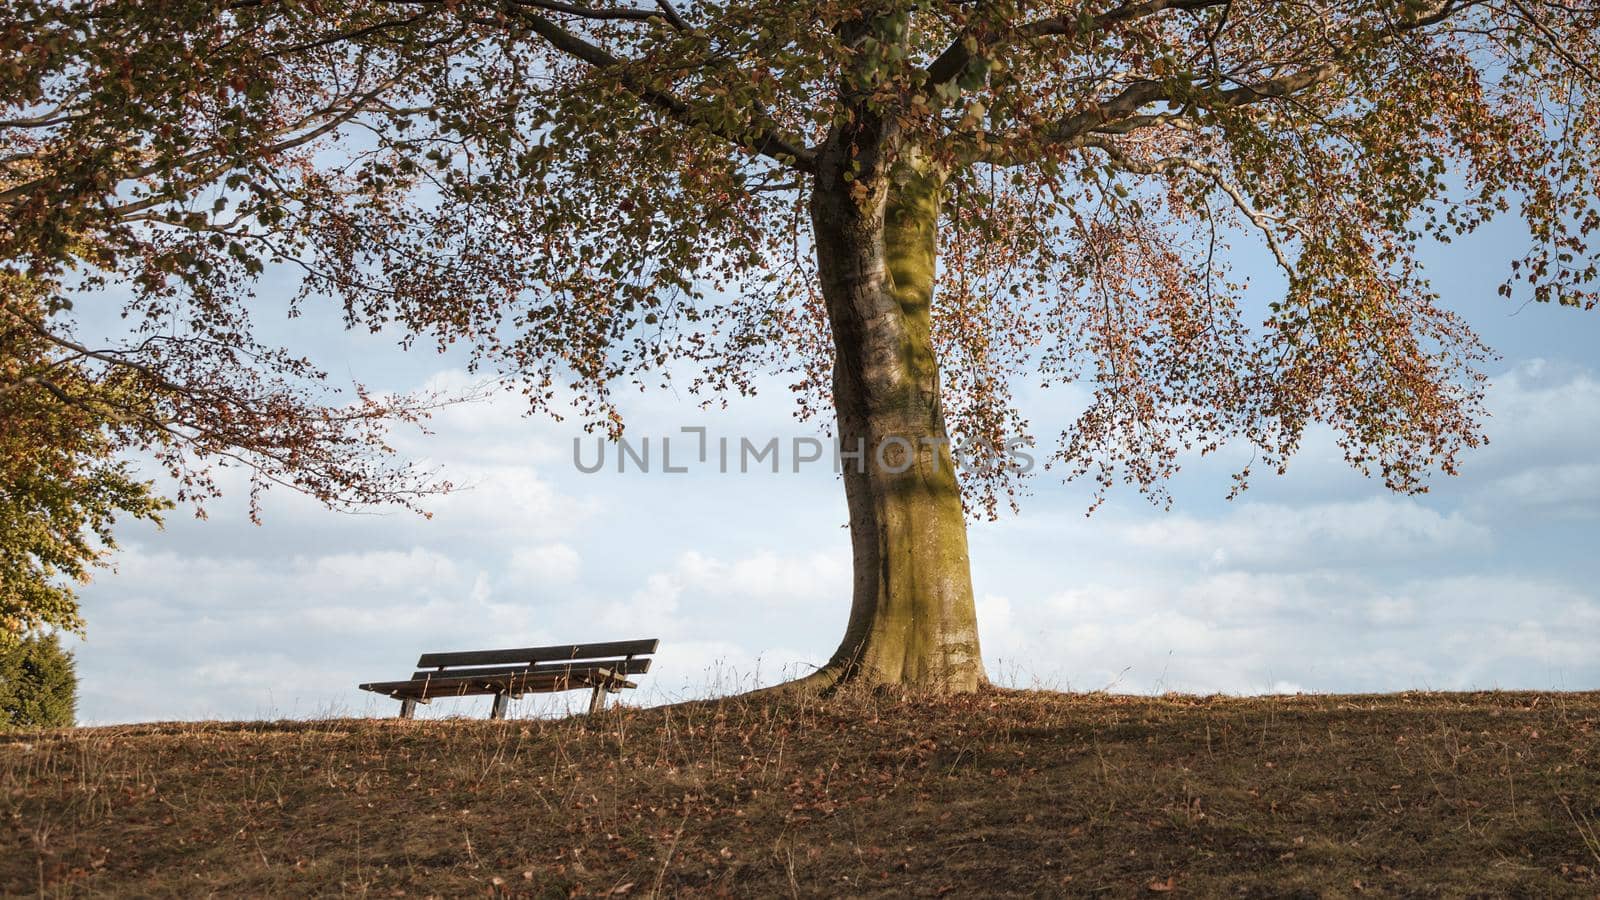 A bench in an autumn park under a colorful tree